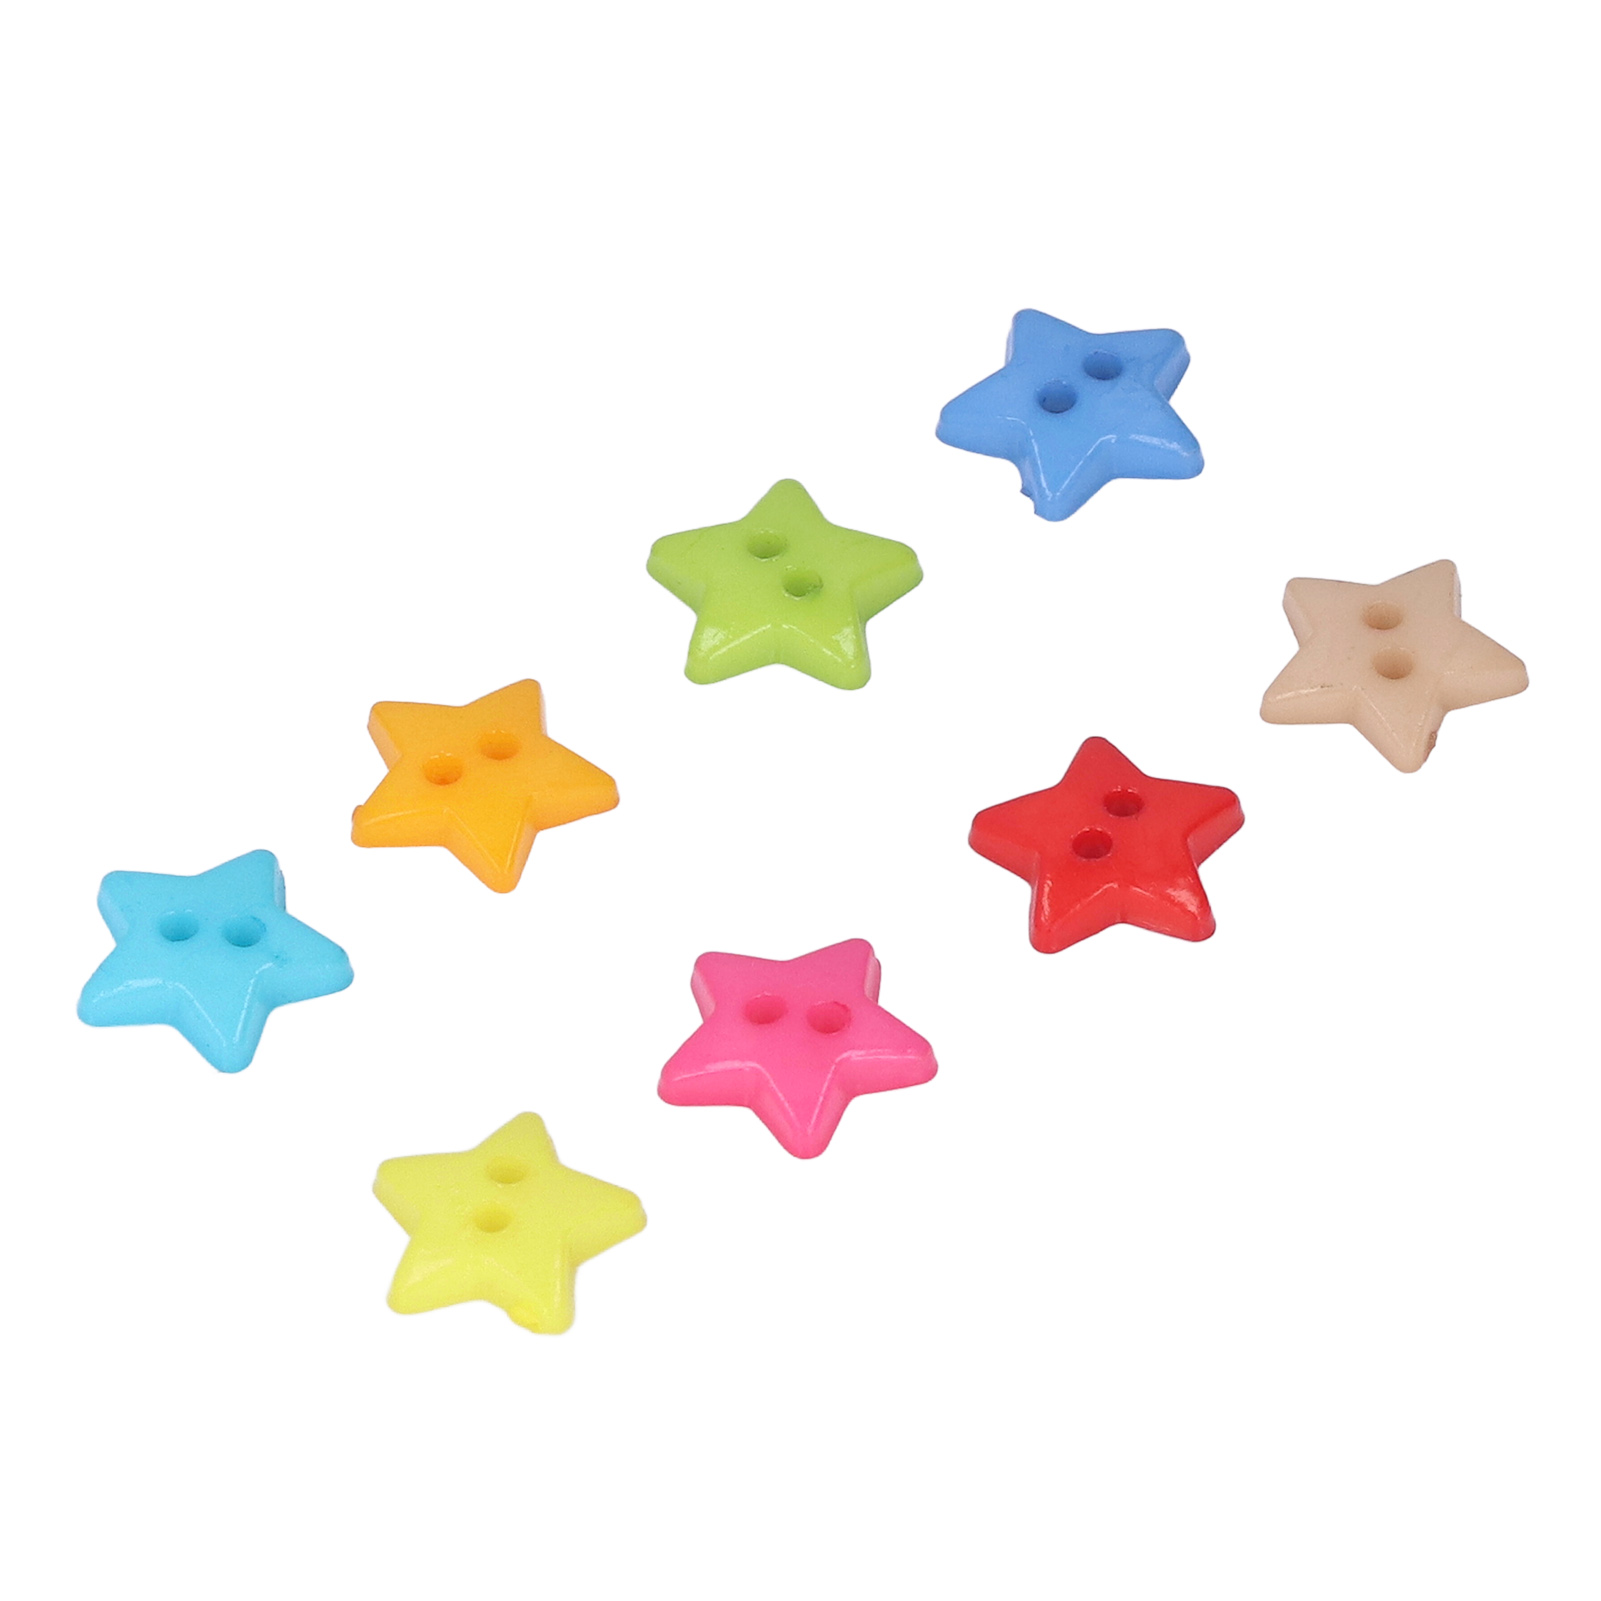 Greensen 200Pcs Star Buttons Colorful Unique Design Cute Small Decorative  Buttons For Sewing Decoration DIY Crafts,Craft Buttons 